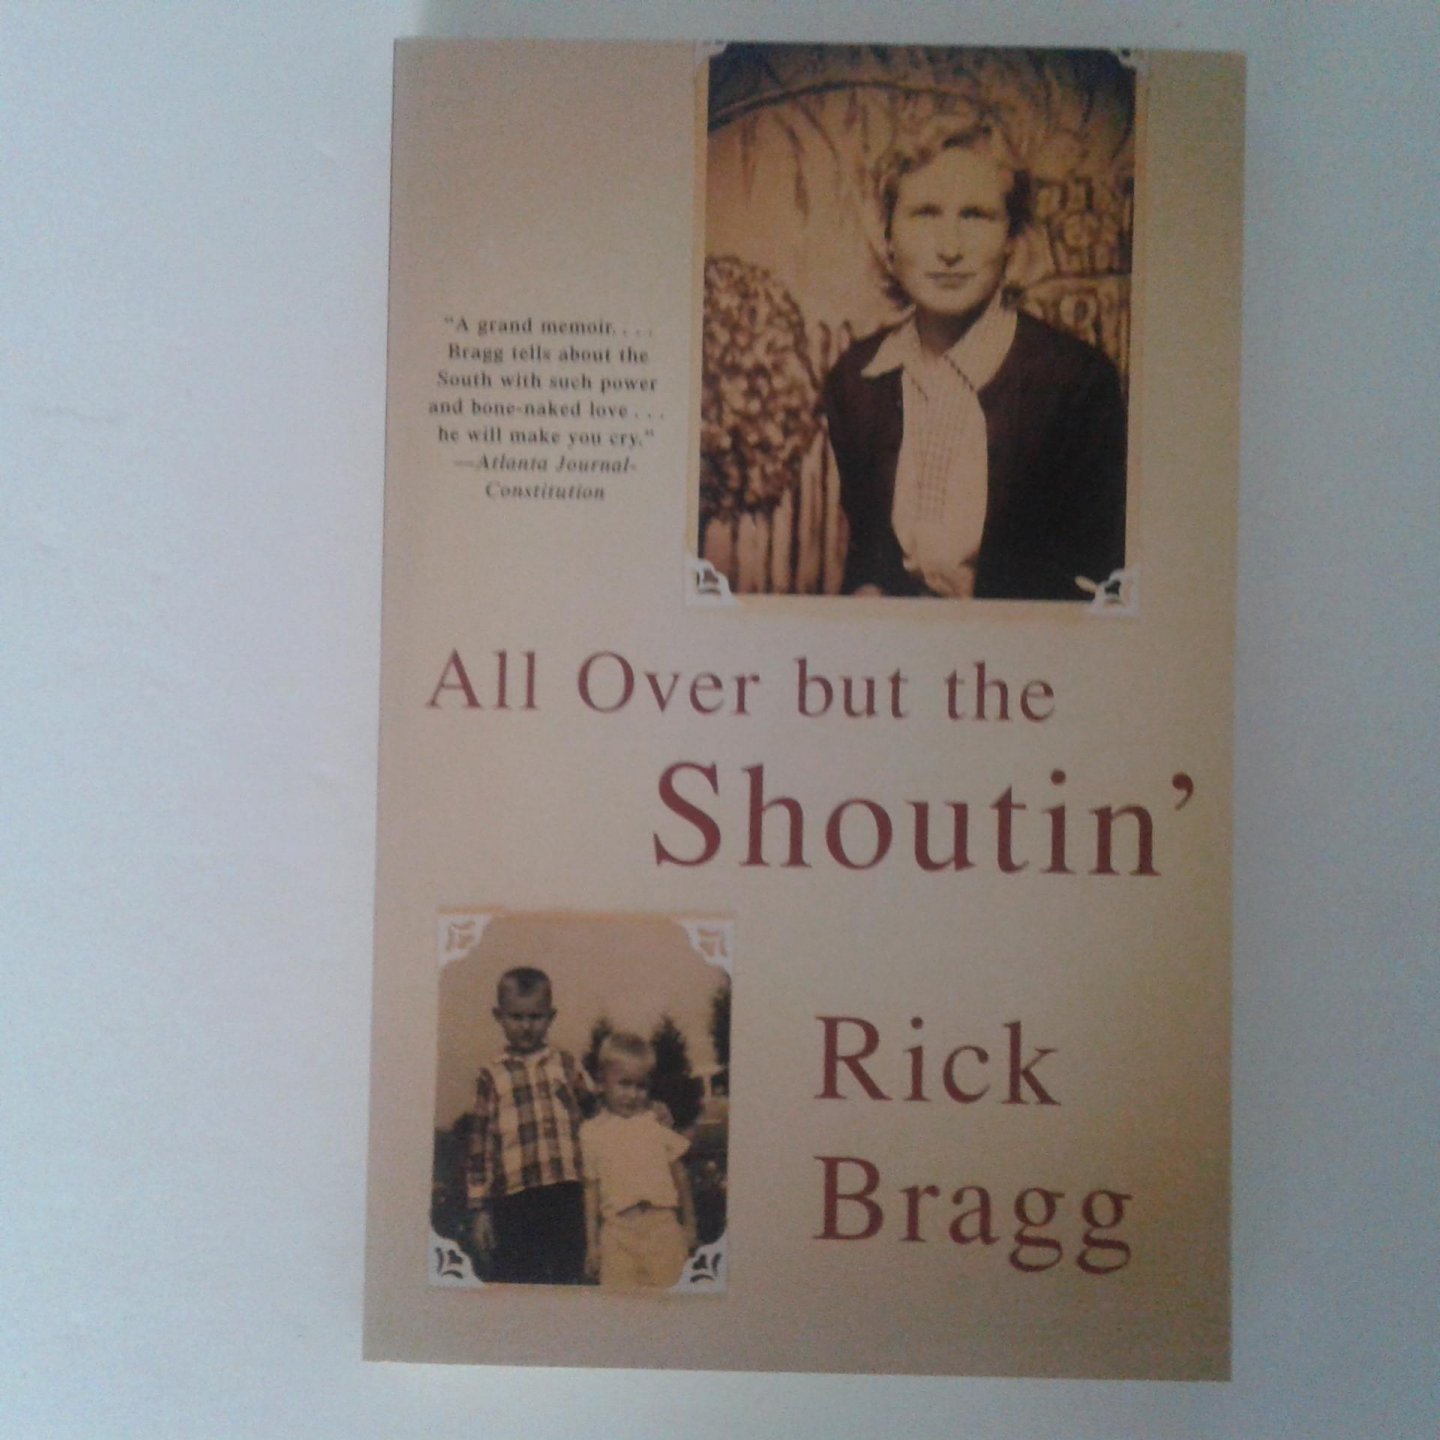 Bragg, Rick - All over but the Schoutin'